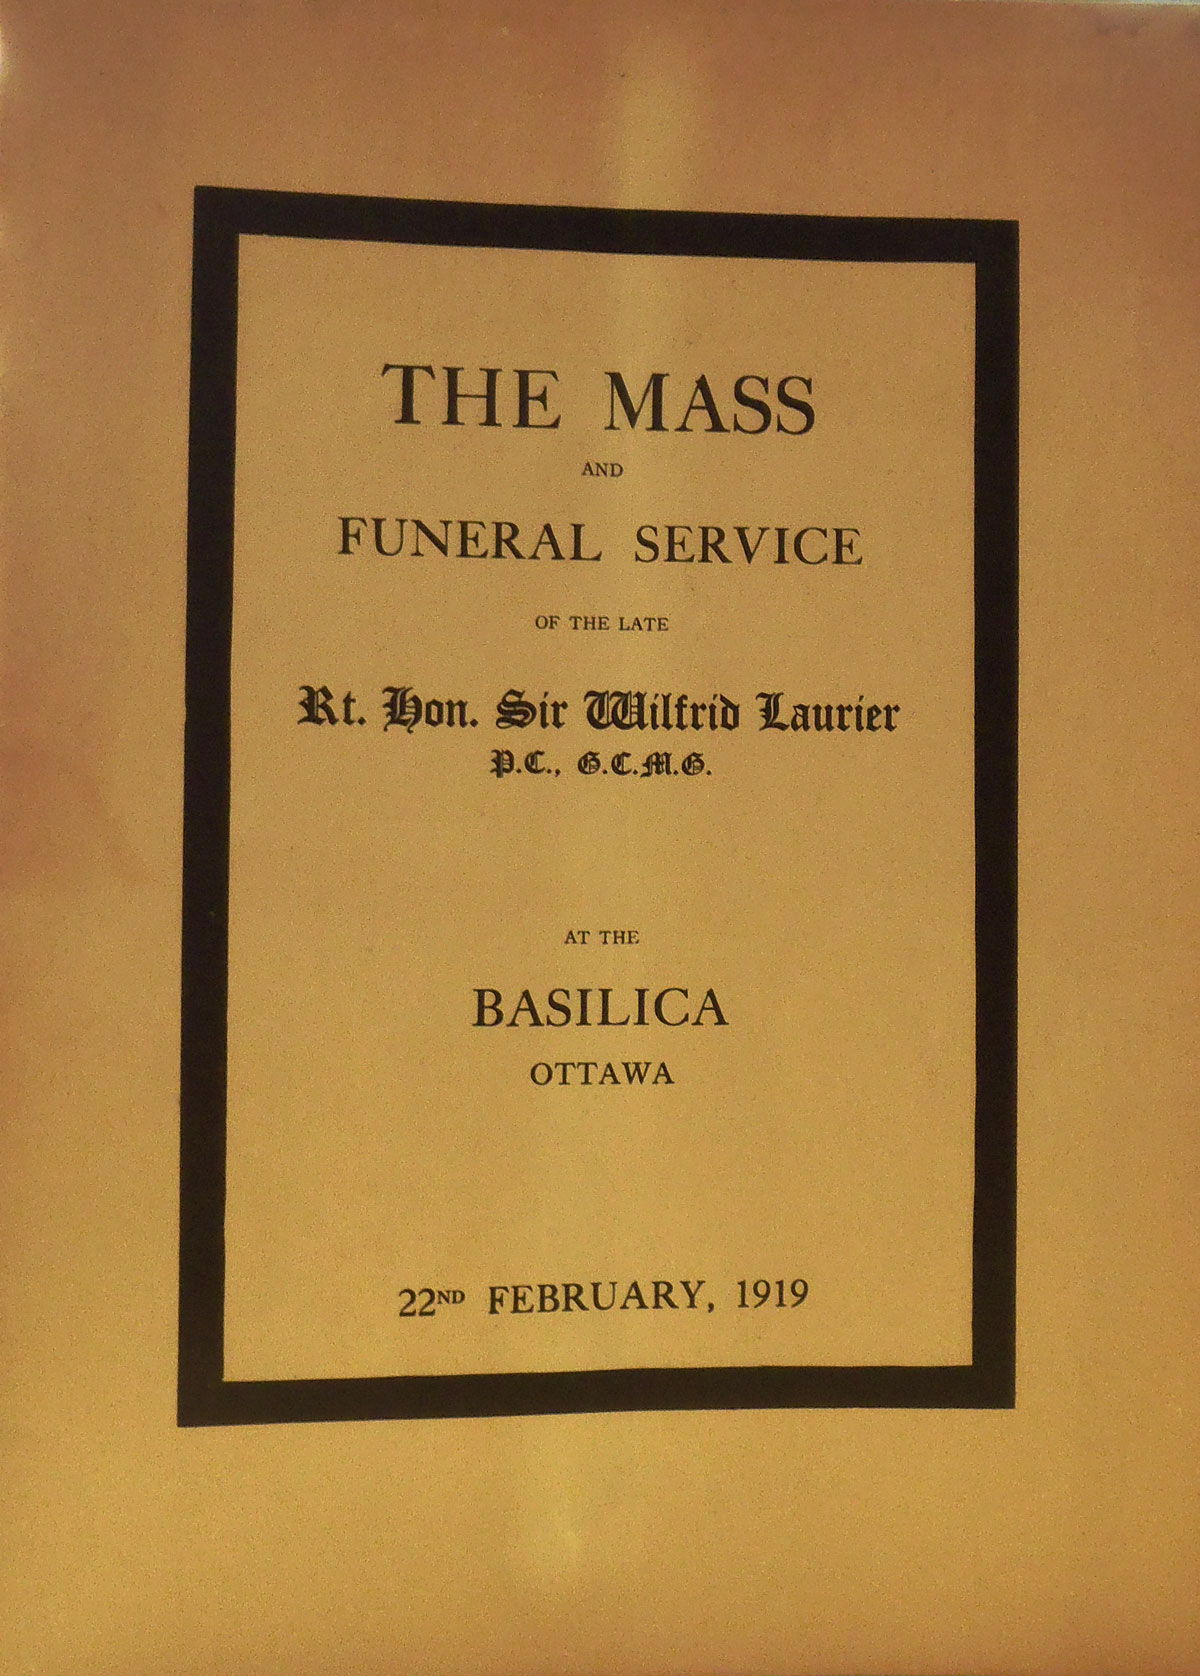 Program for Laurier’s funeral mass at the Basilica in Ottawa, February 22, 1919. Canadian Museum of History, Rare Books, FC 551 L3 M37 1919. Photo: Xavier Gélinas, PB140740